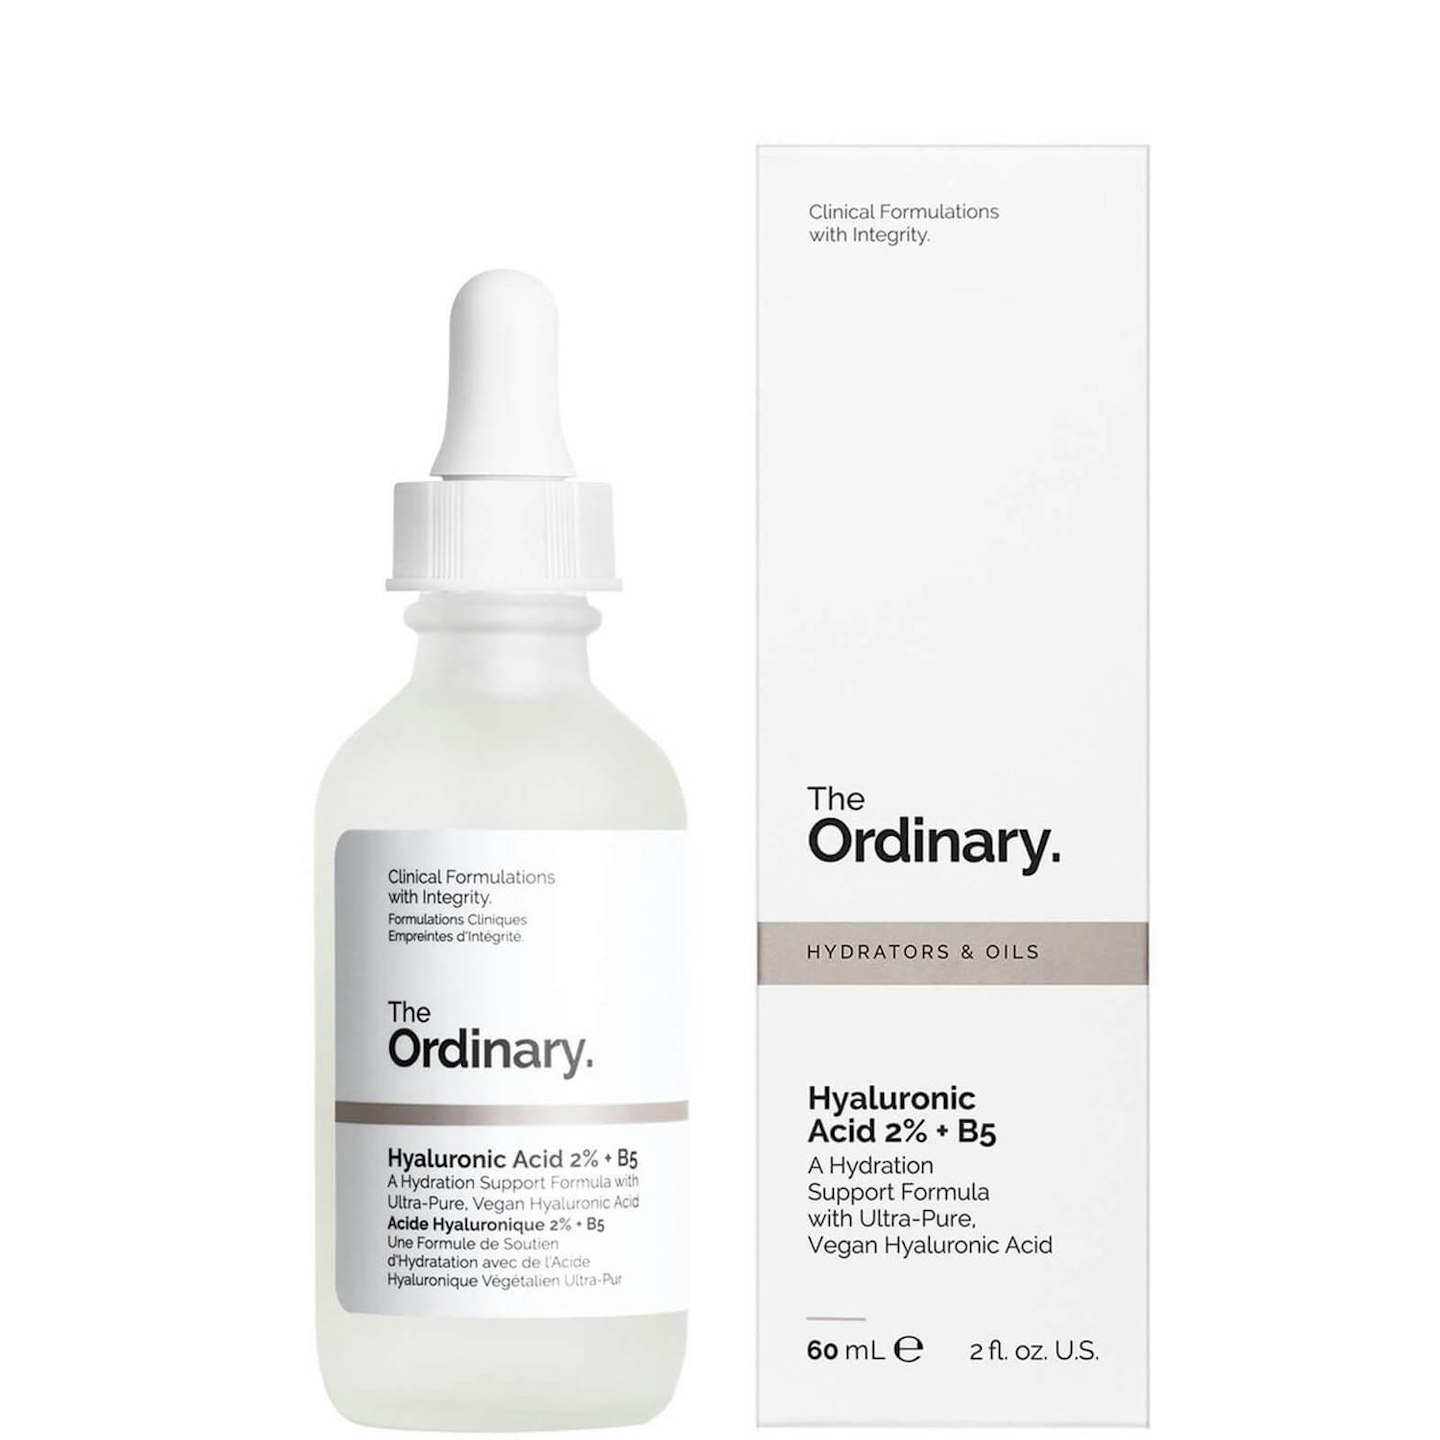 The Orinary Hyaluronic Acid